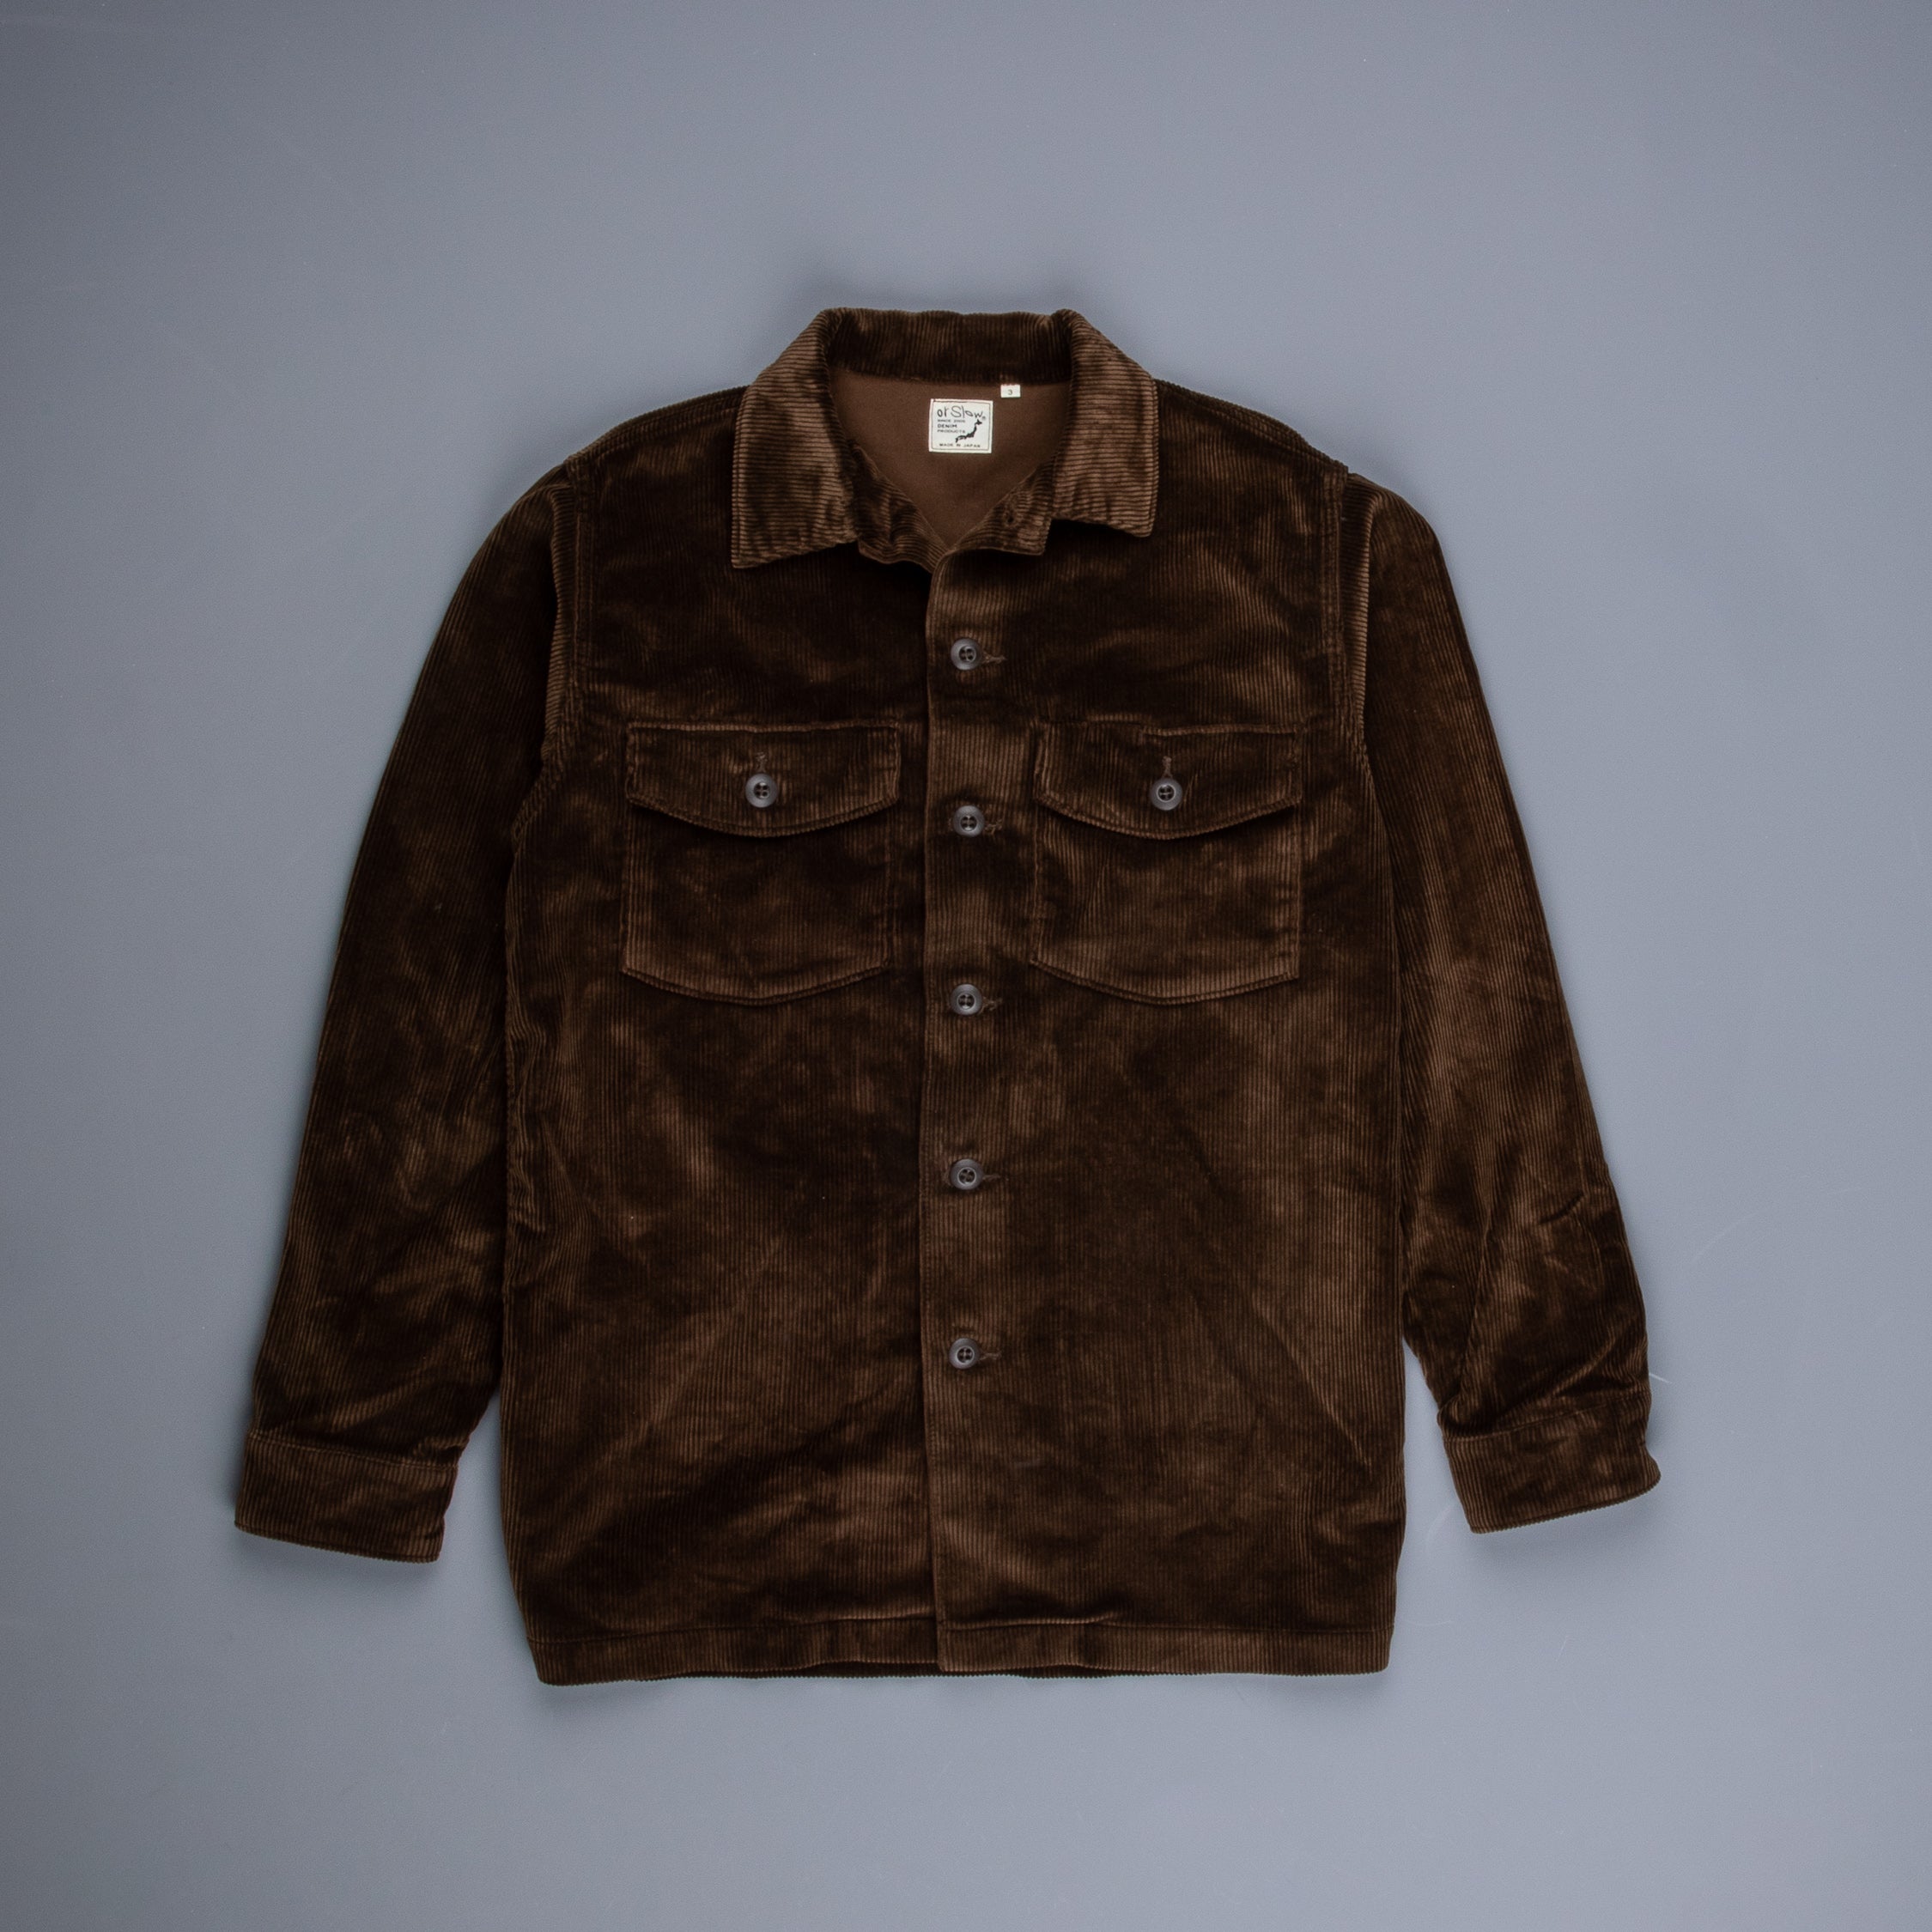 Orslow US Army Fatigue Shirt Corduroy Dark Brown – Frans Boone Store